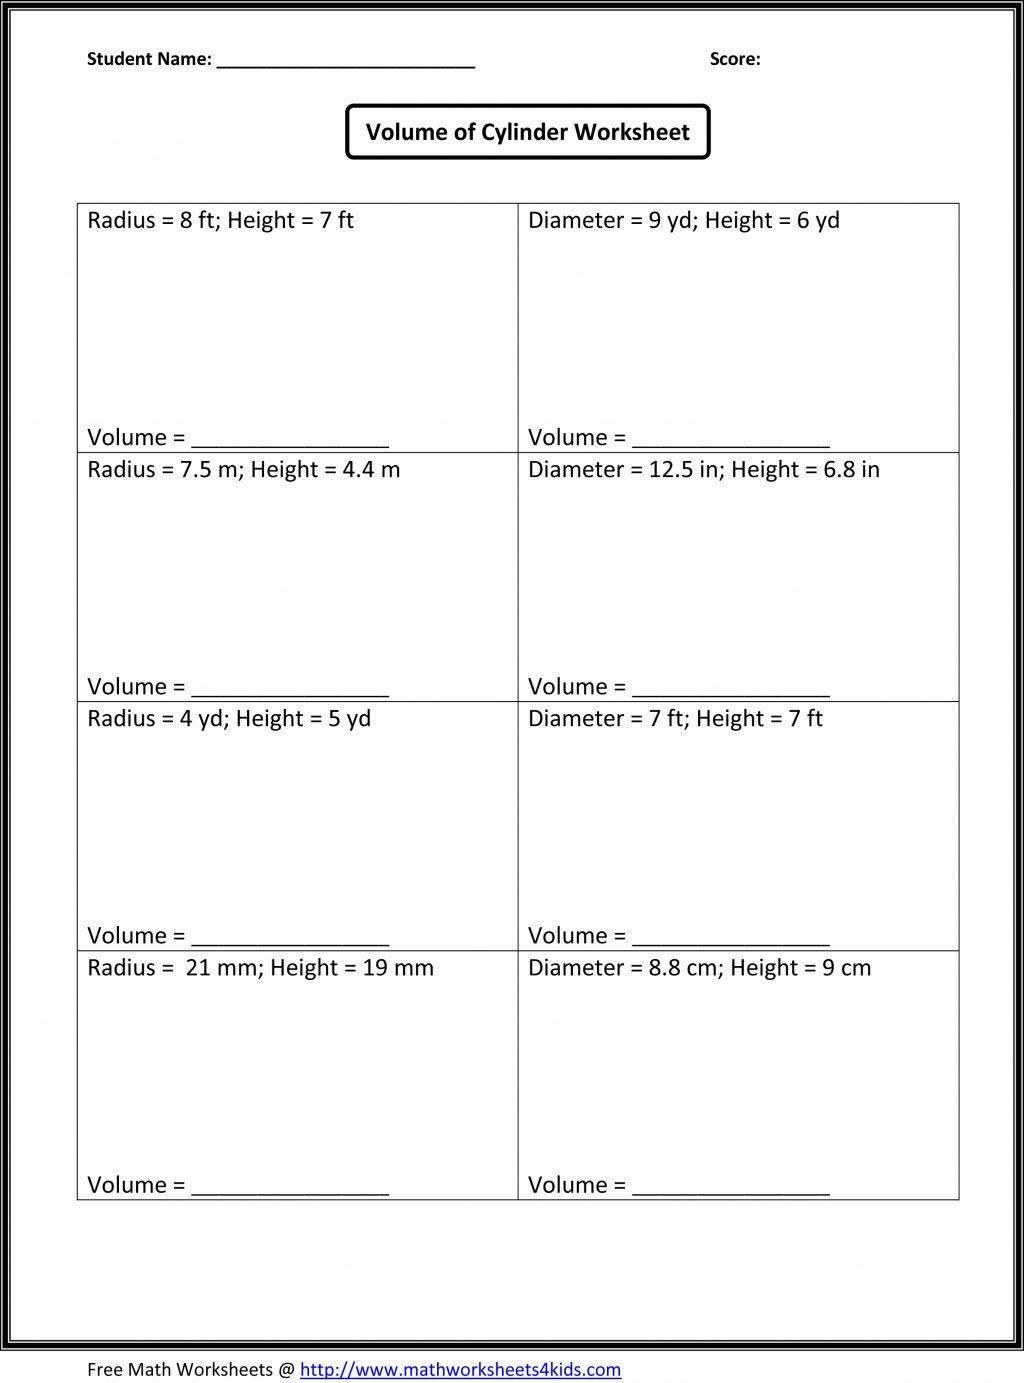 common-core-math-worksheets-4th-grade-decimals-worksheet-example-worksheet-template-tips-and